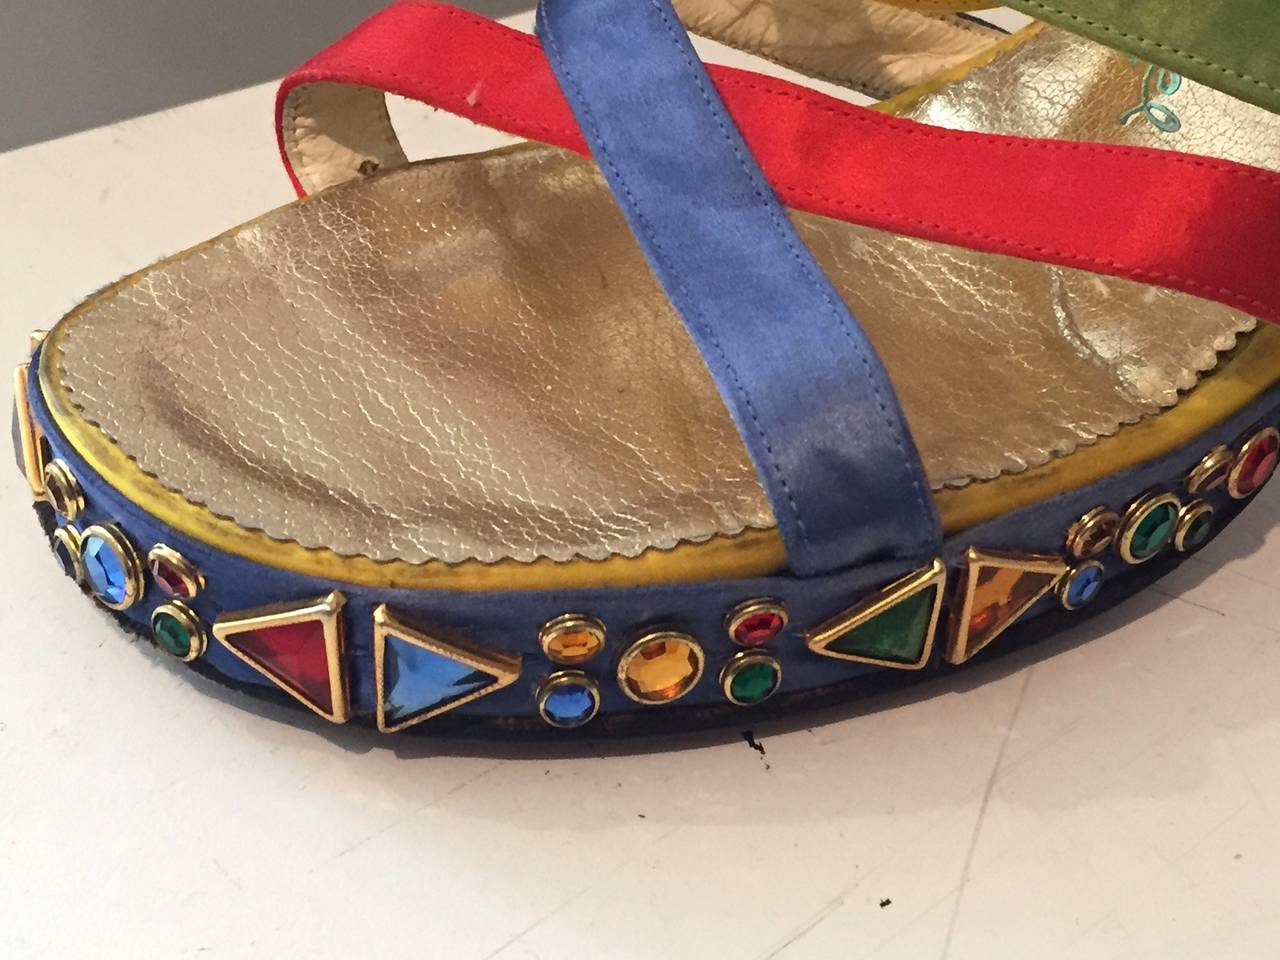 A fabulous, colorful 1960s silk satin strappy evening sandal: Blue, red, yellow and chartreuse strap sandals with fabulous jeweled platform.